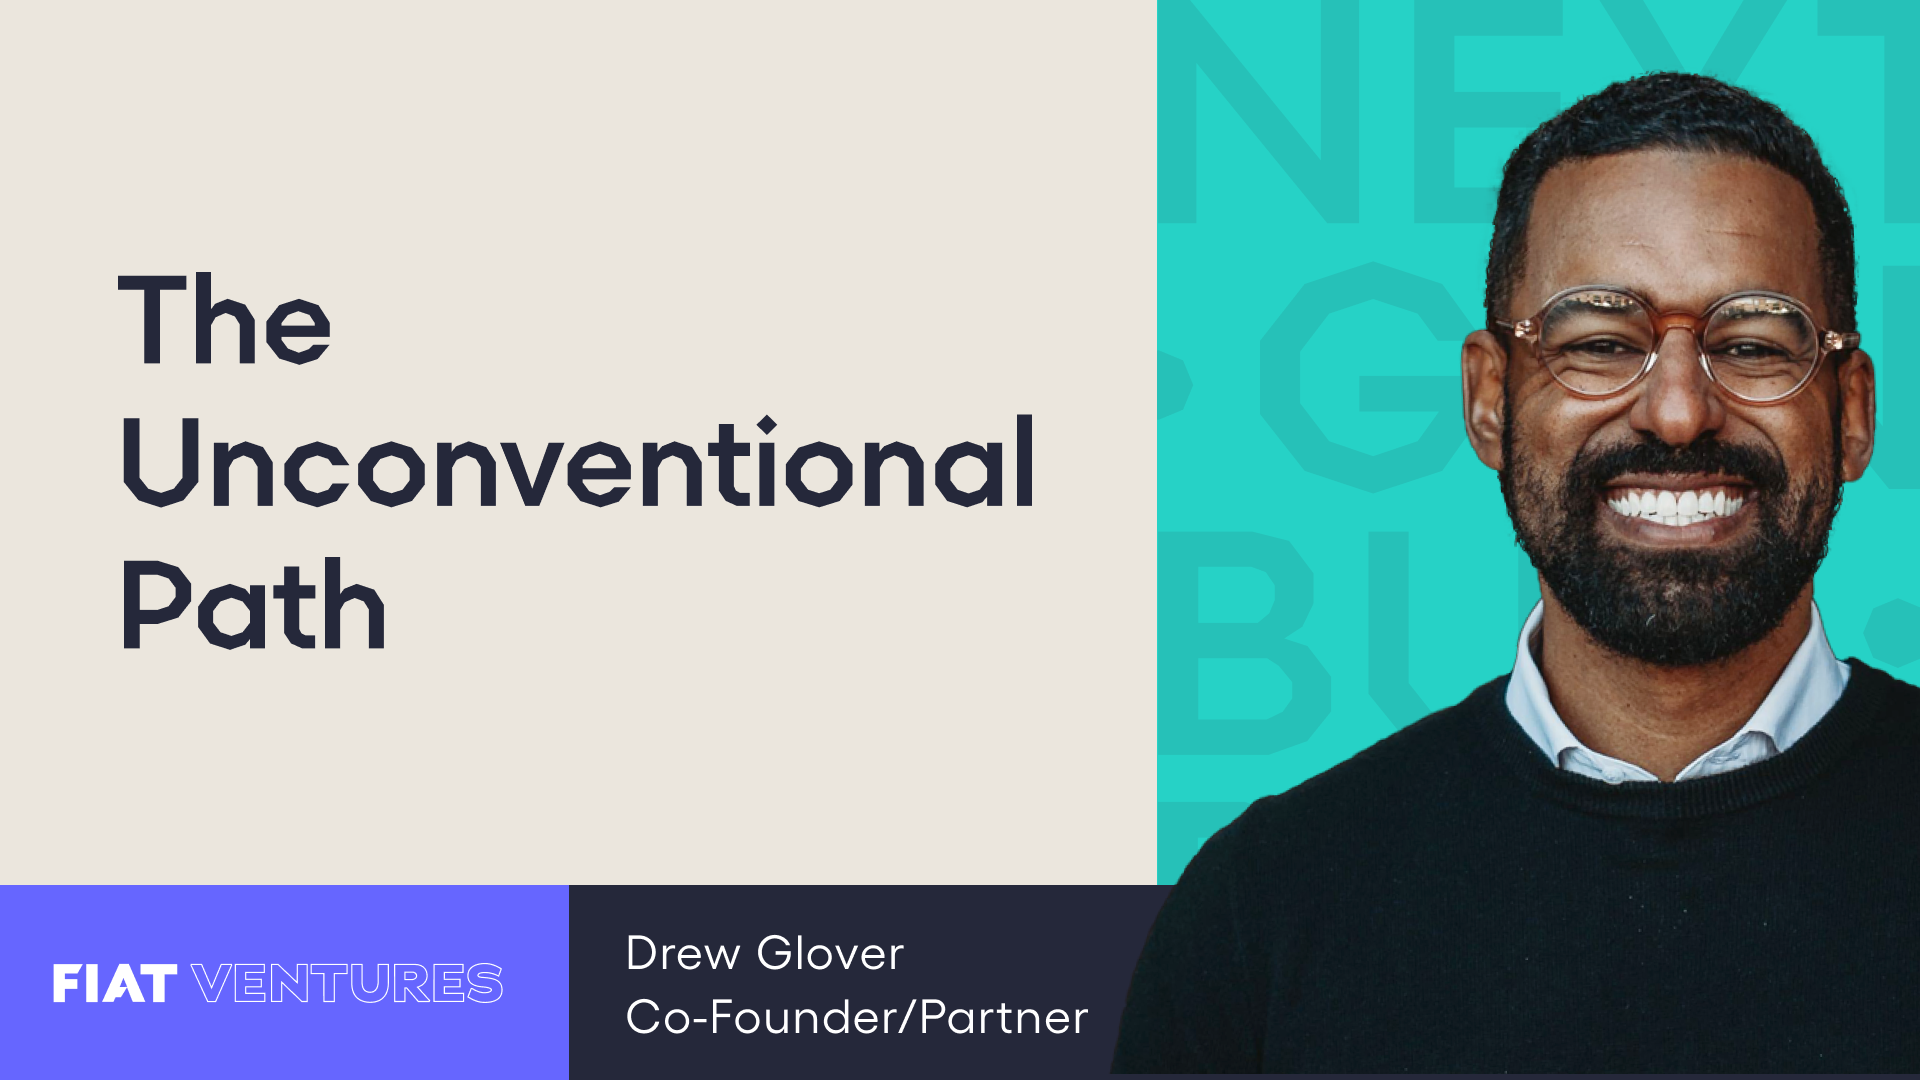 Next Gen Builders Podcast episode 2 title "The unconventional path" with headshot of the guest, Drew Glover with FIAT Ventures